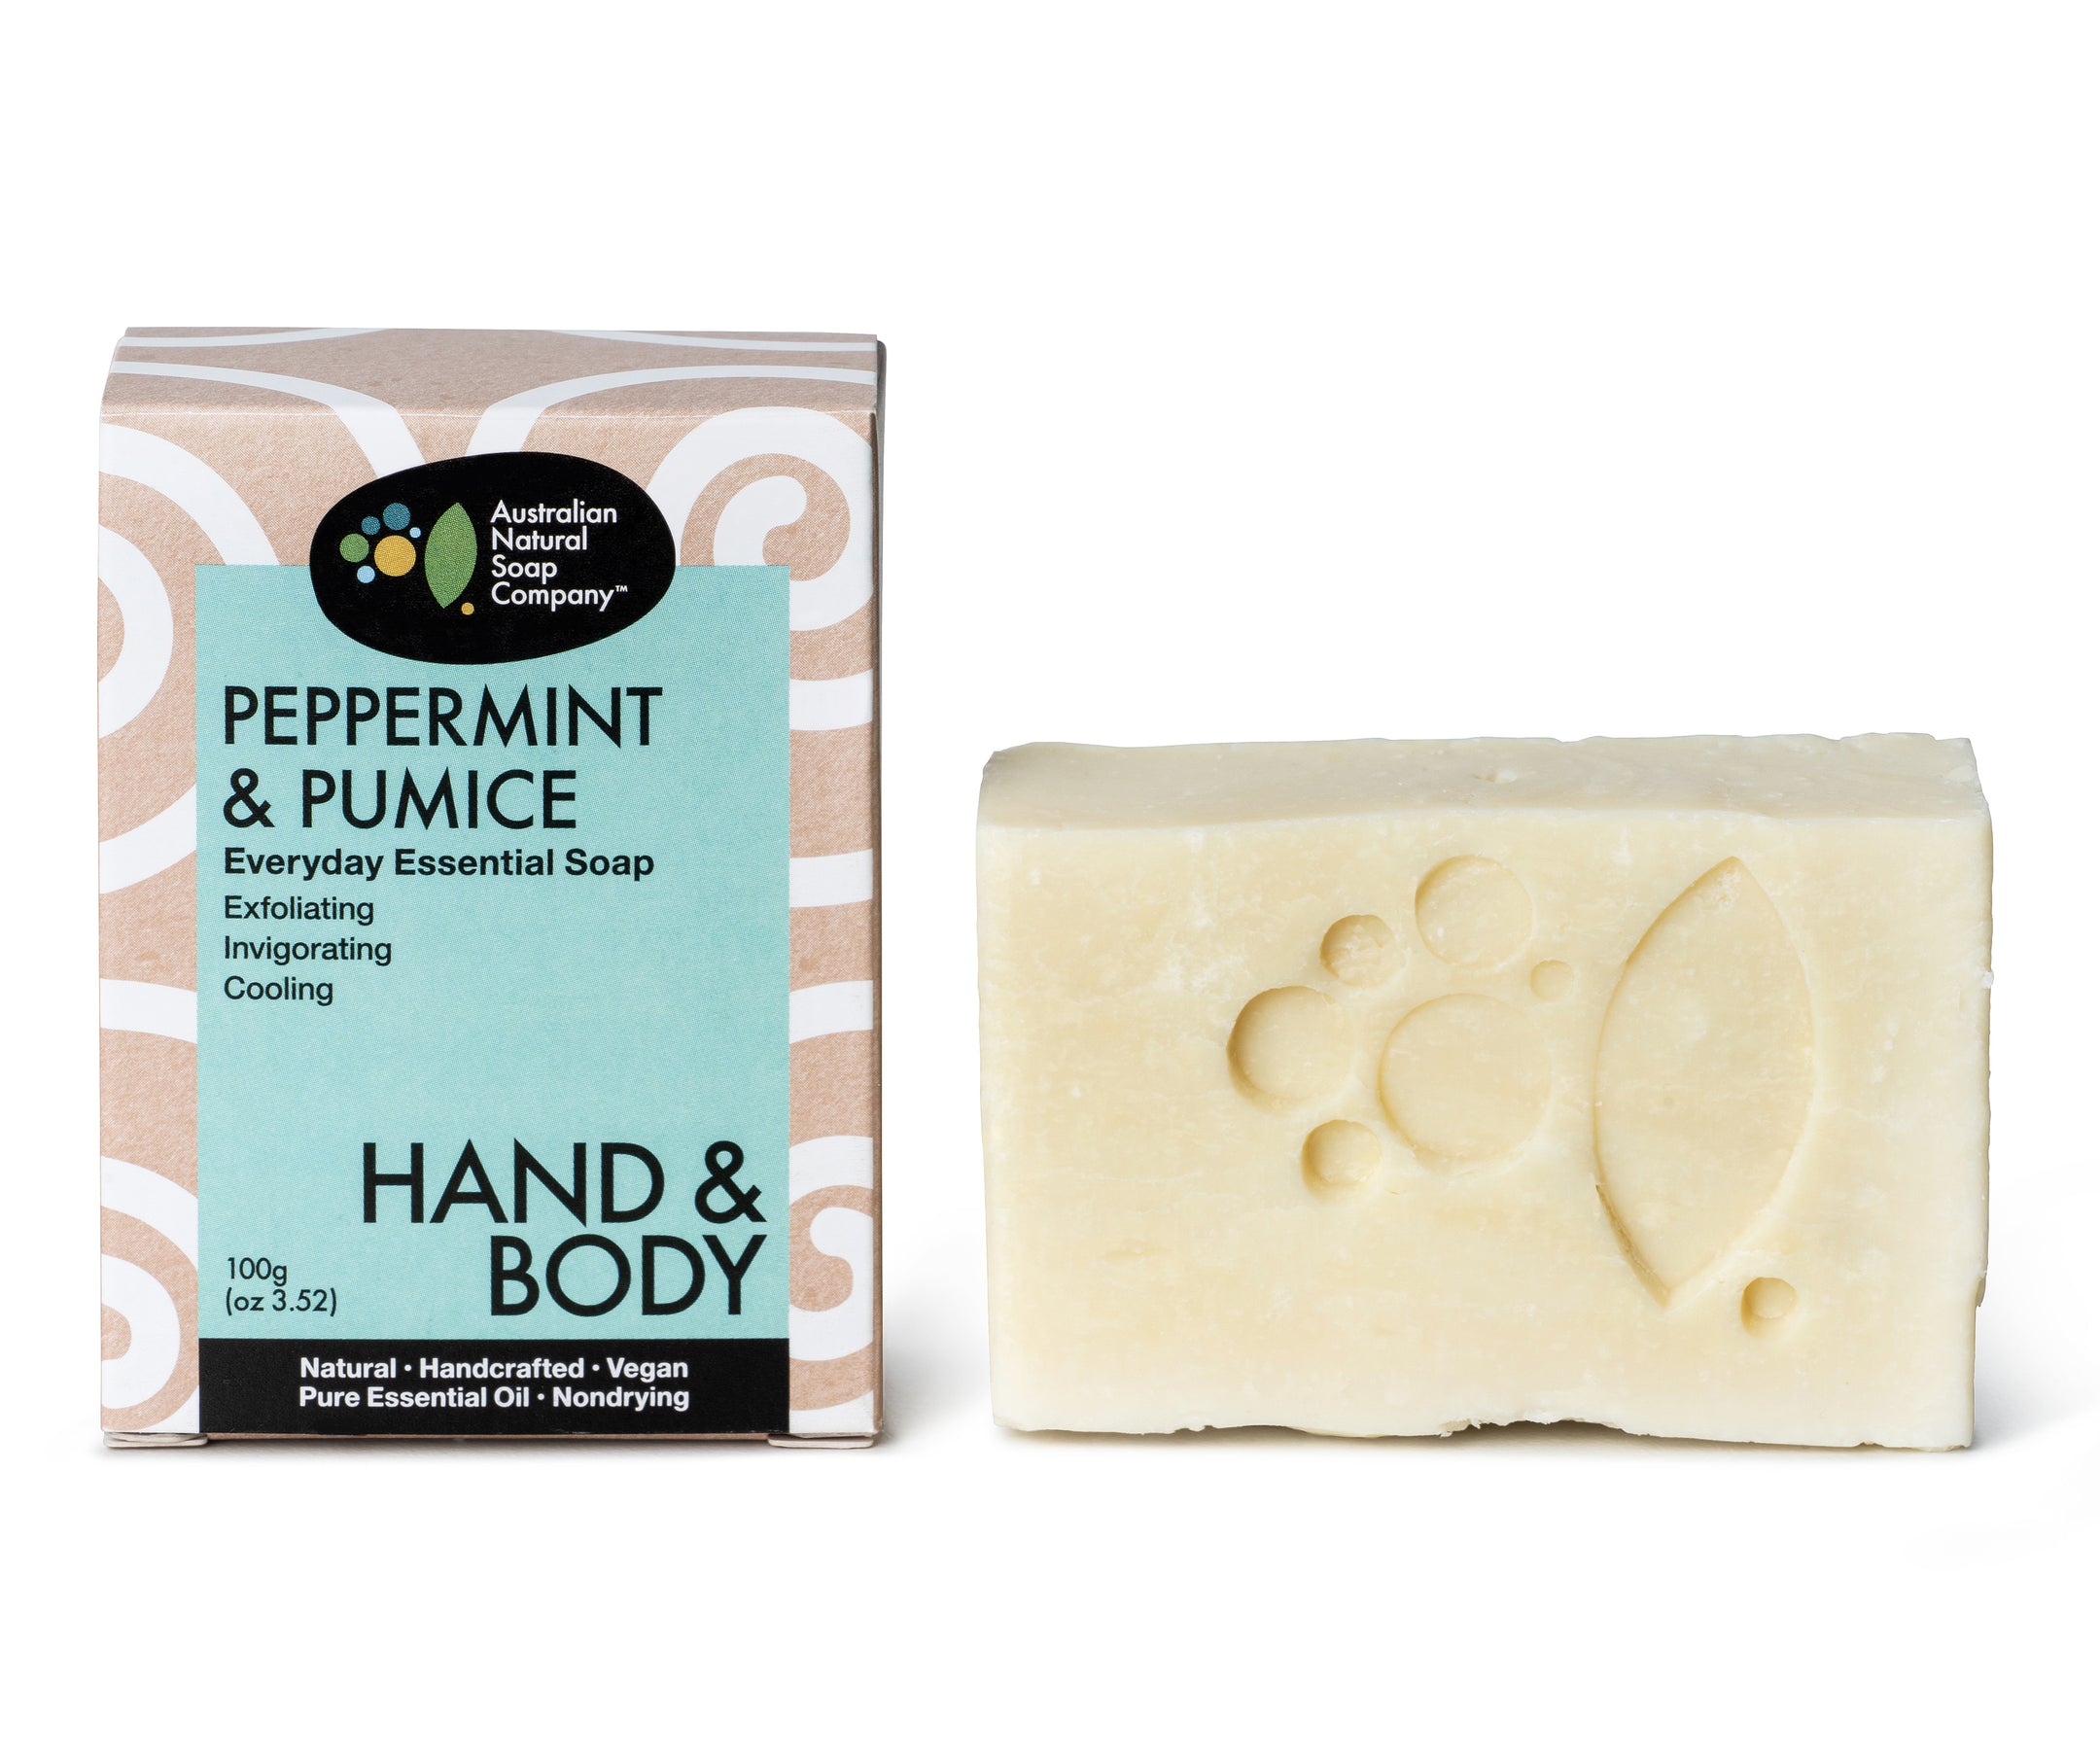 Australian Natural Soap Company peppermint and pumice hand and body bar and box